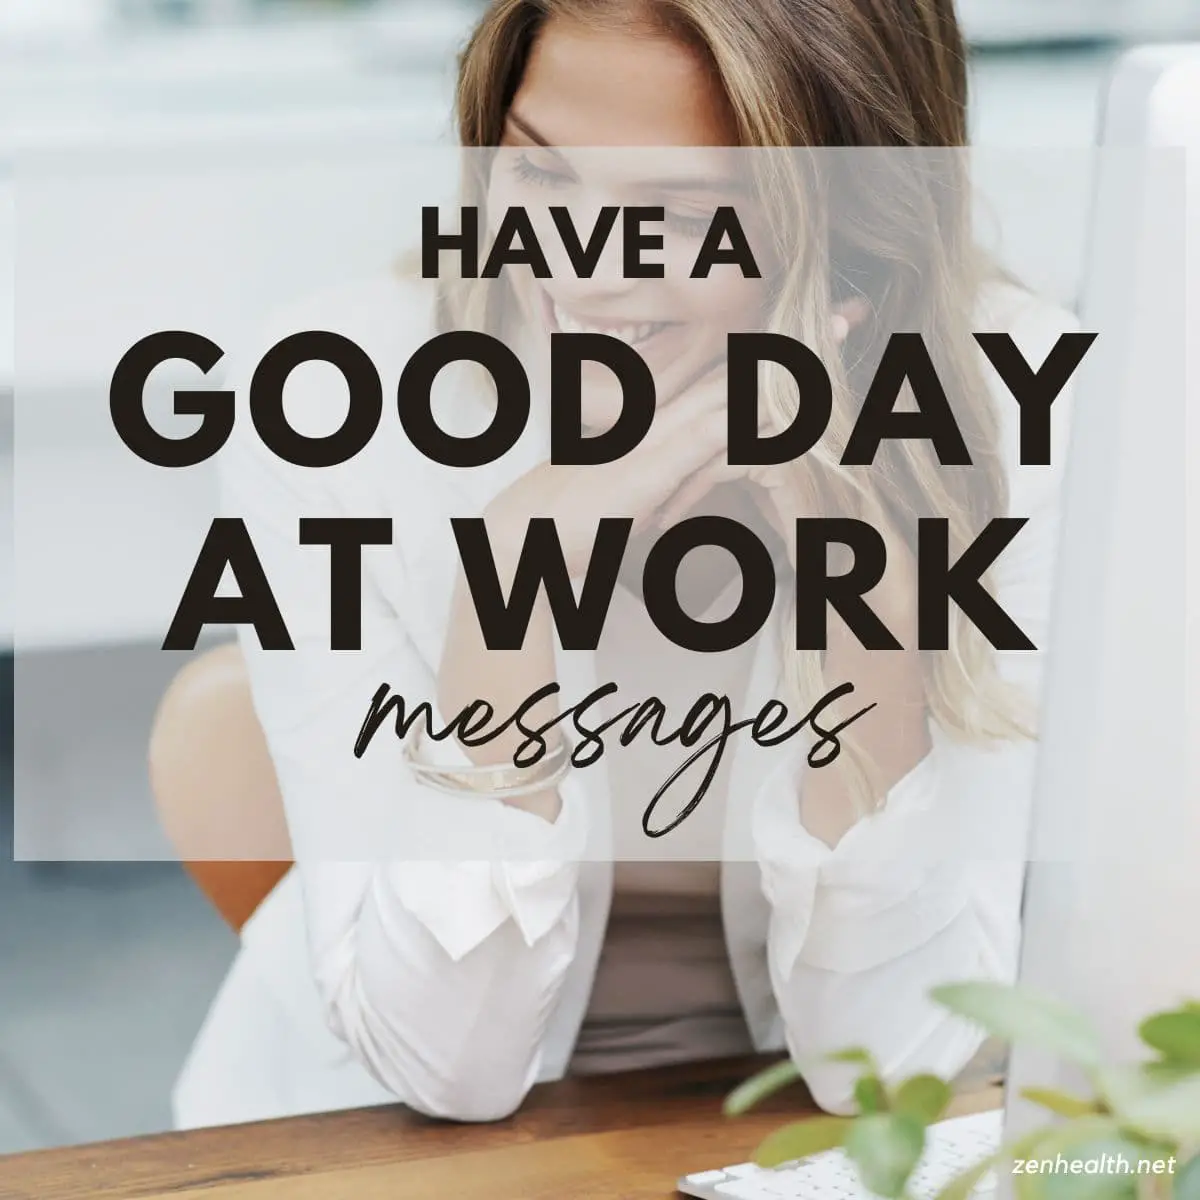 20 Have a Good Day at Work Messages to Brighten Someone’s Day